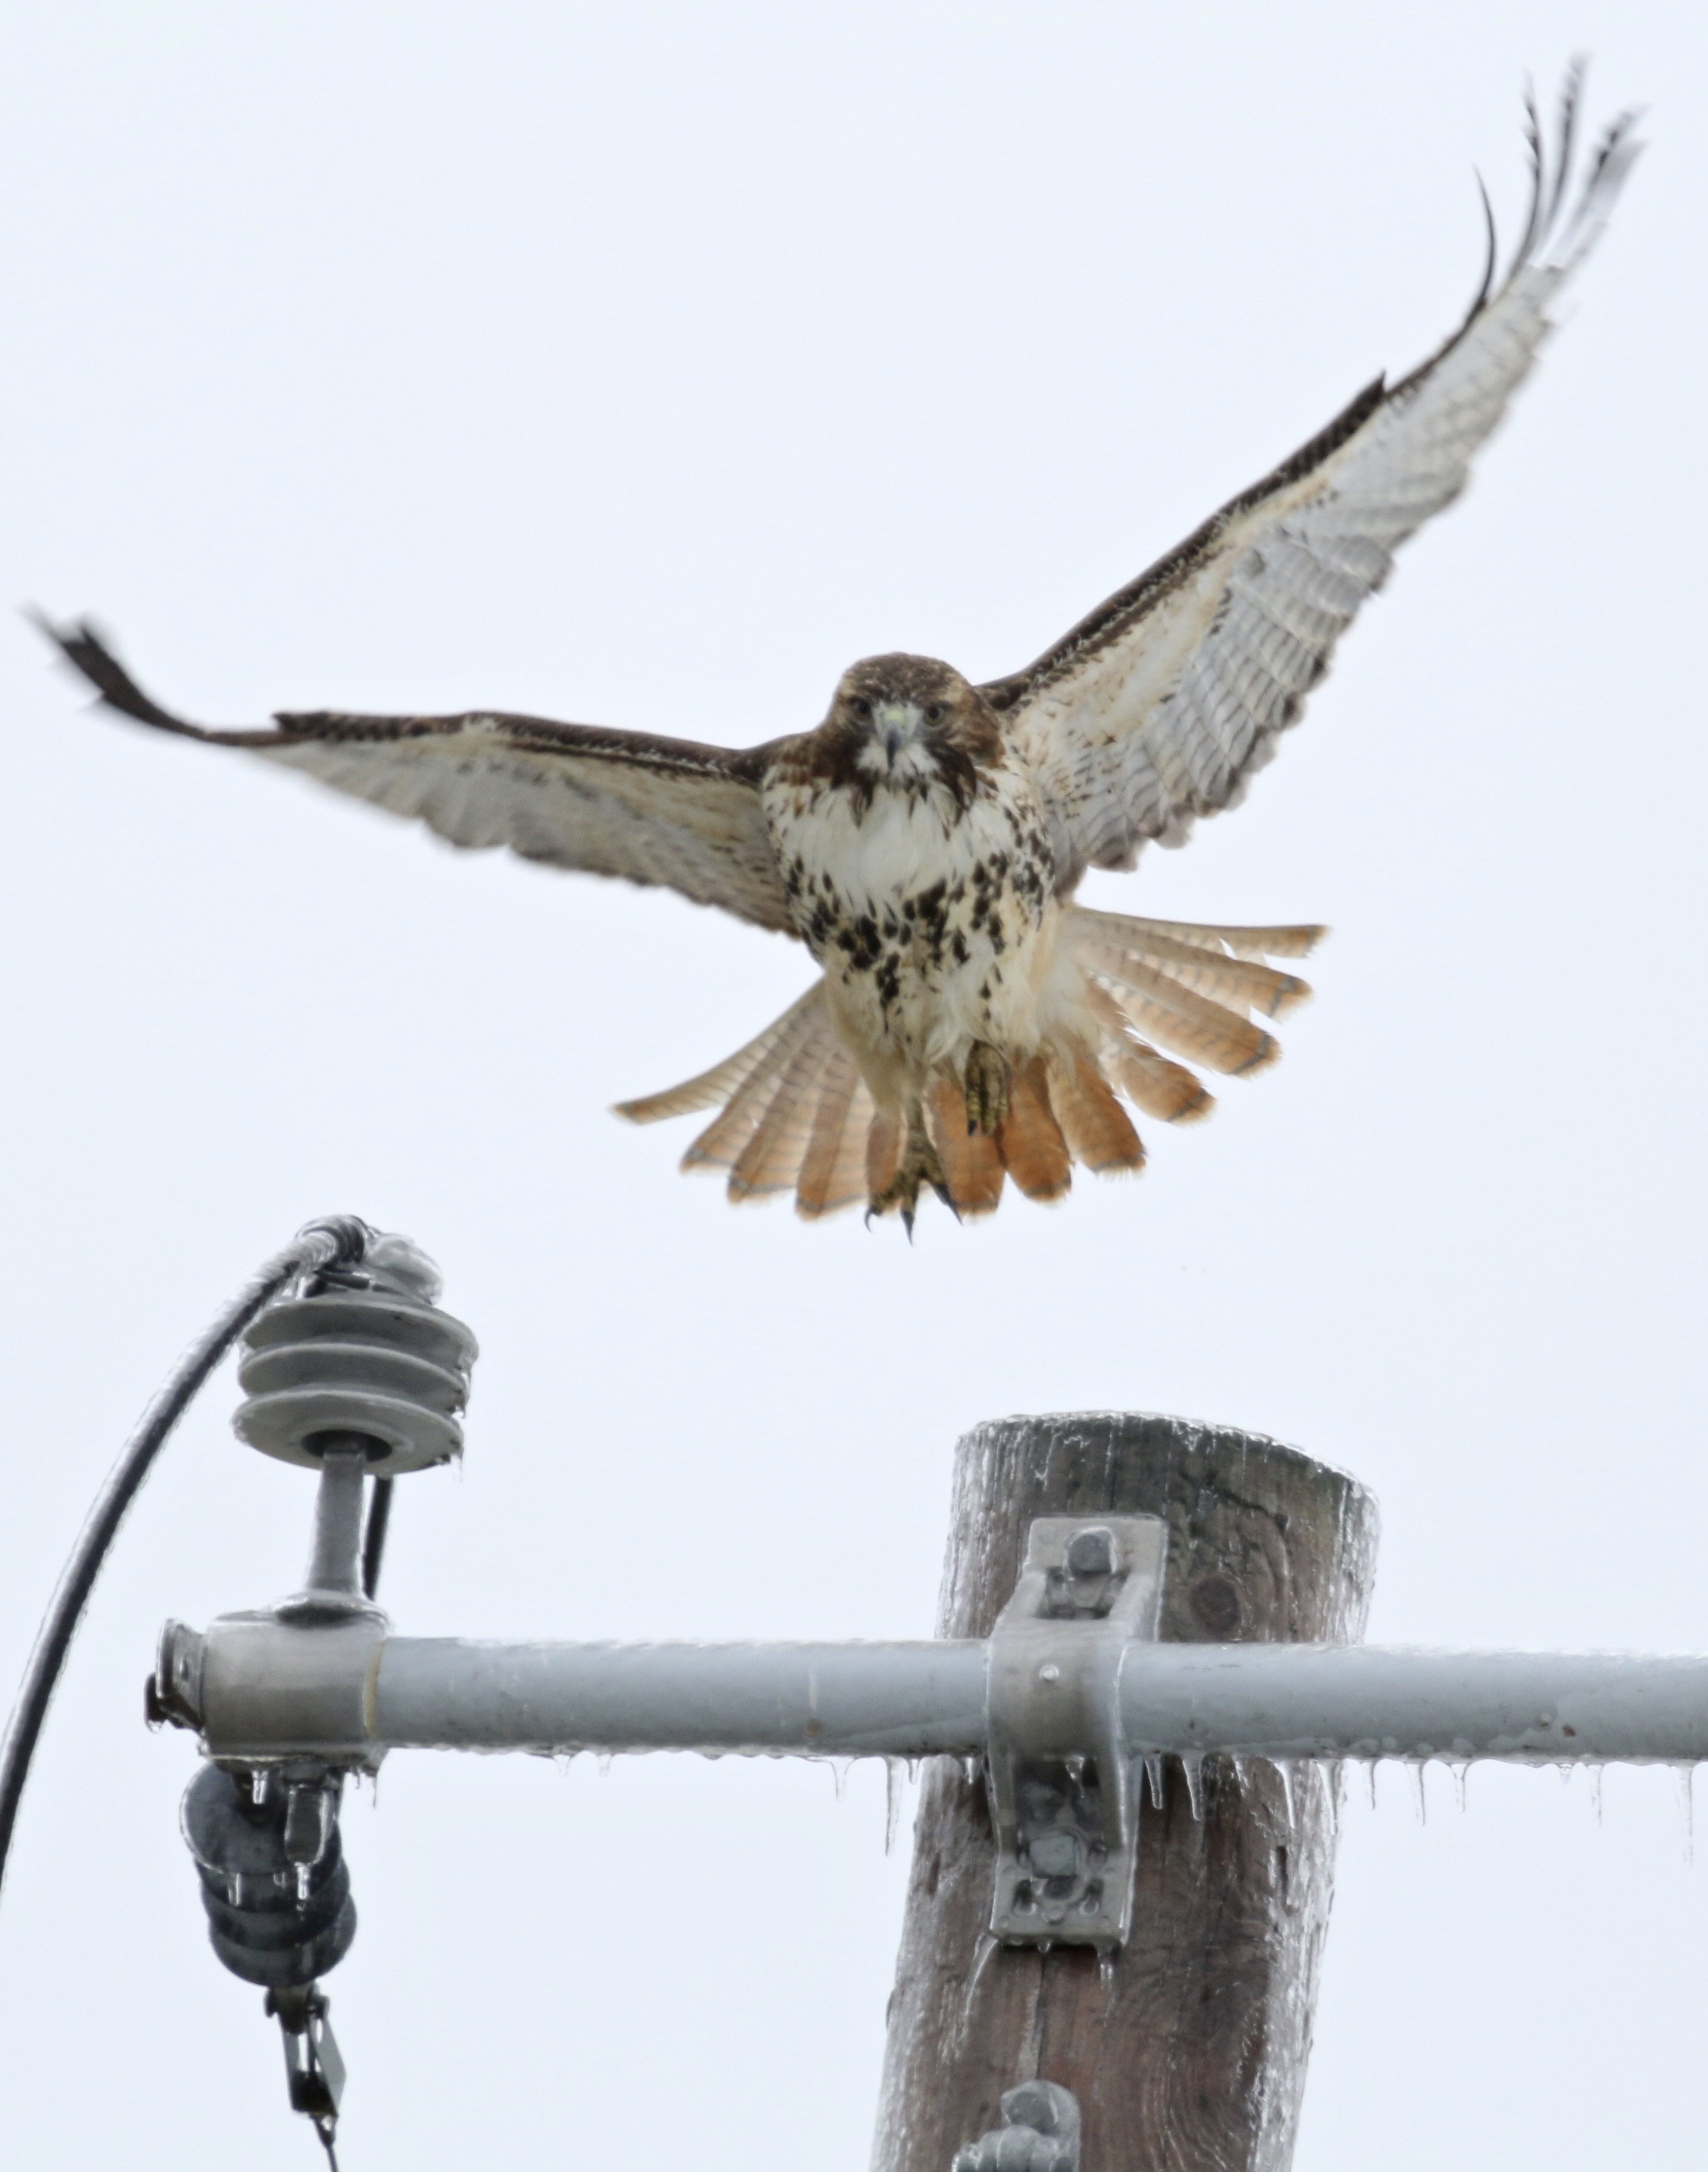 ~A Red-tailed Hawk takes flight off of an icy perch, Black Dirt Region, 12/2915.~